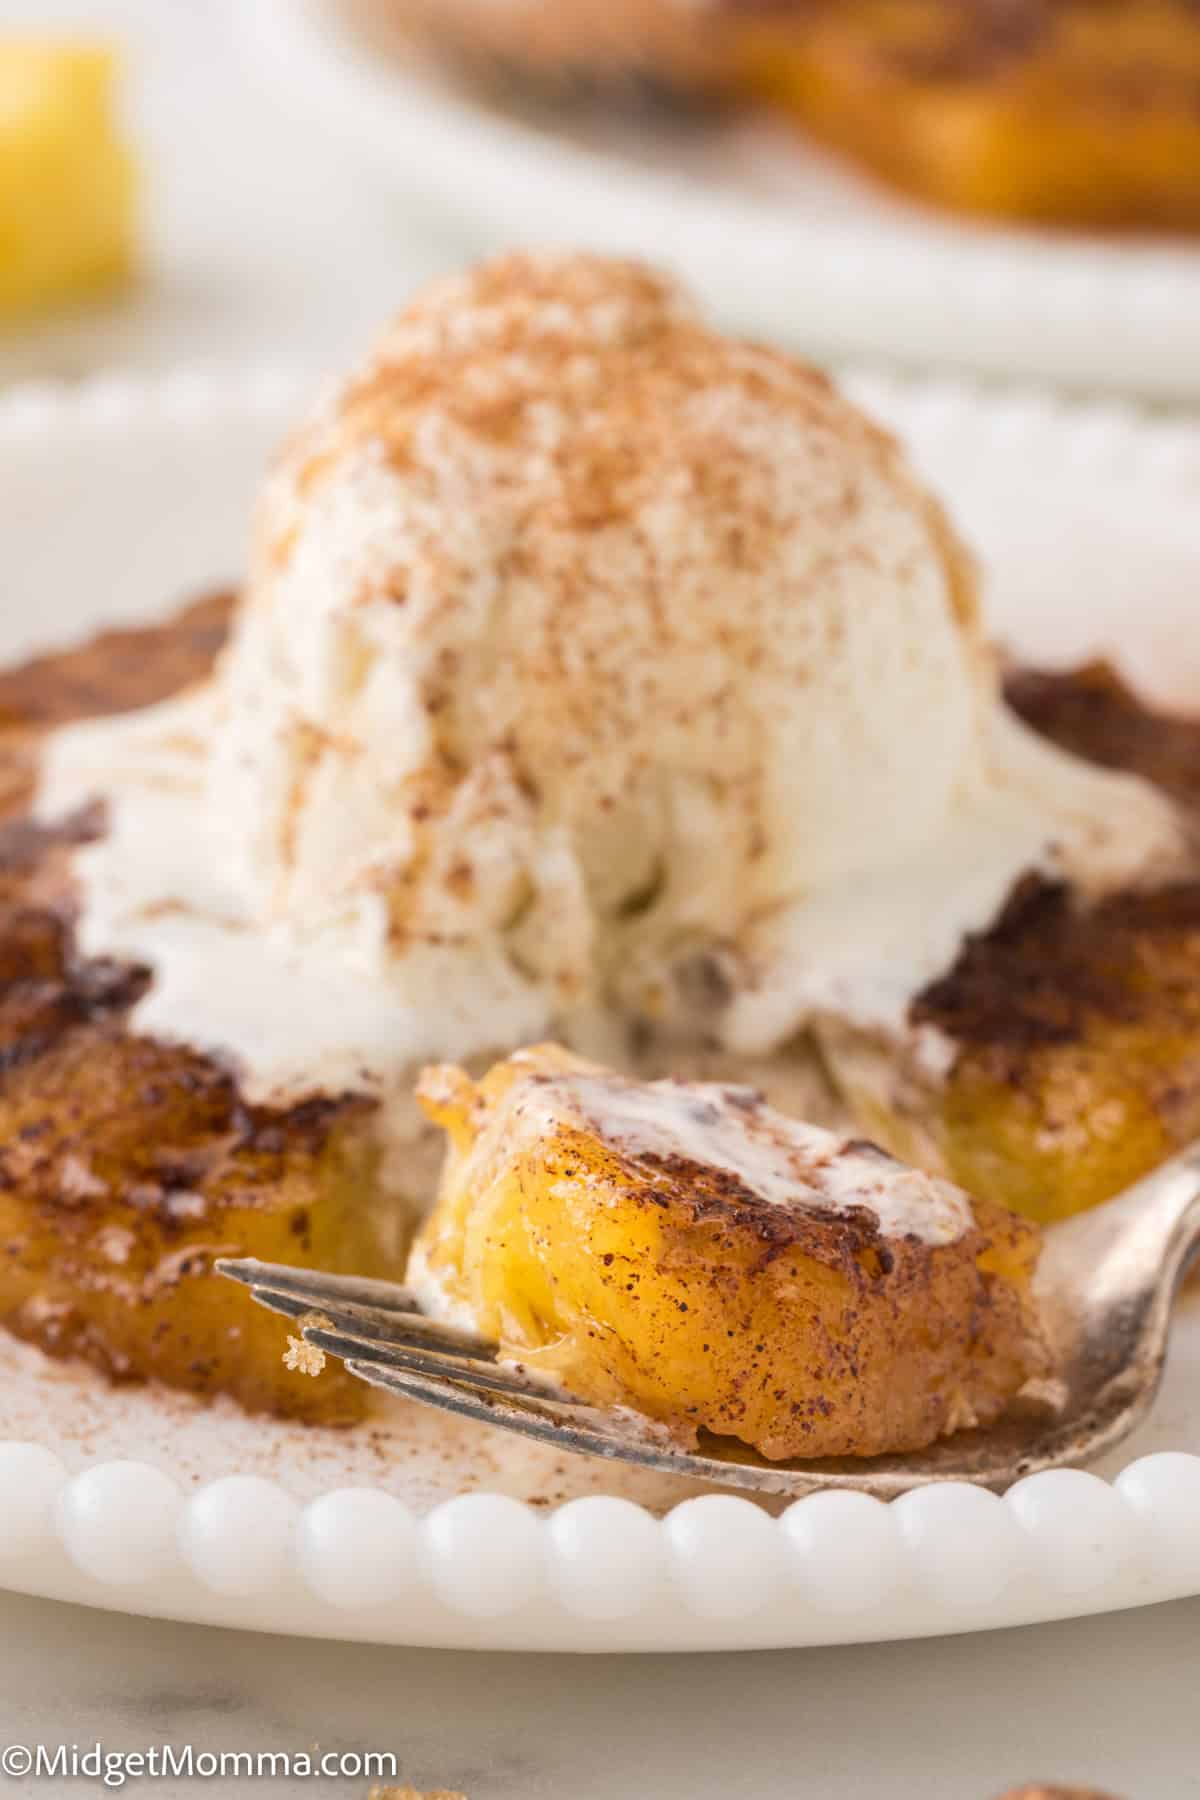 A serving of baked pineapple topped with a scoop of vanilla ice cream and sprinkled with cinnamon on a white plate.